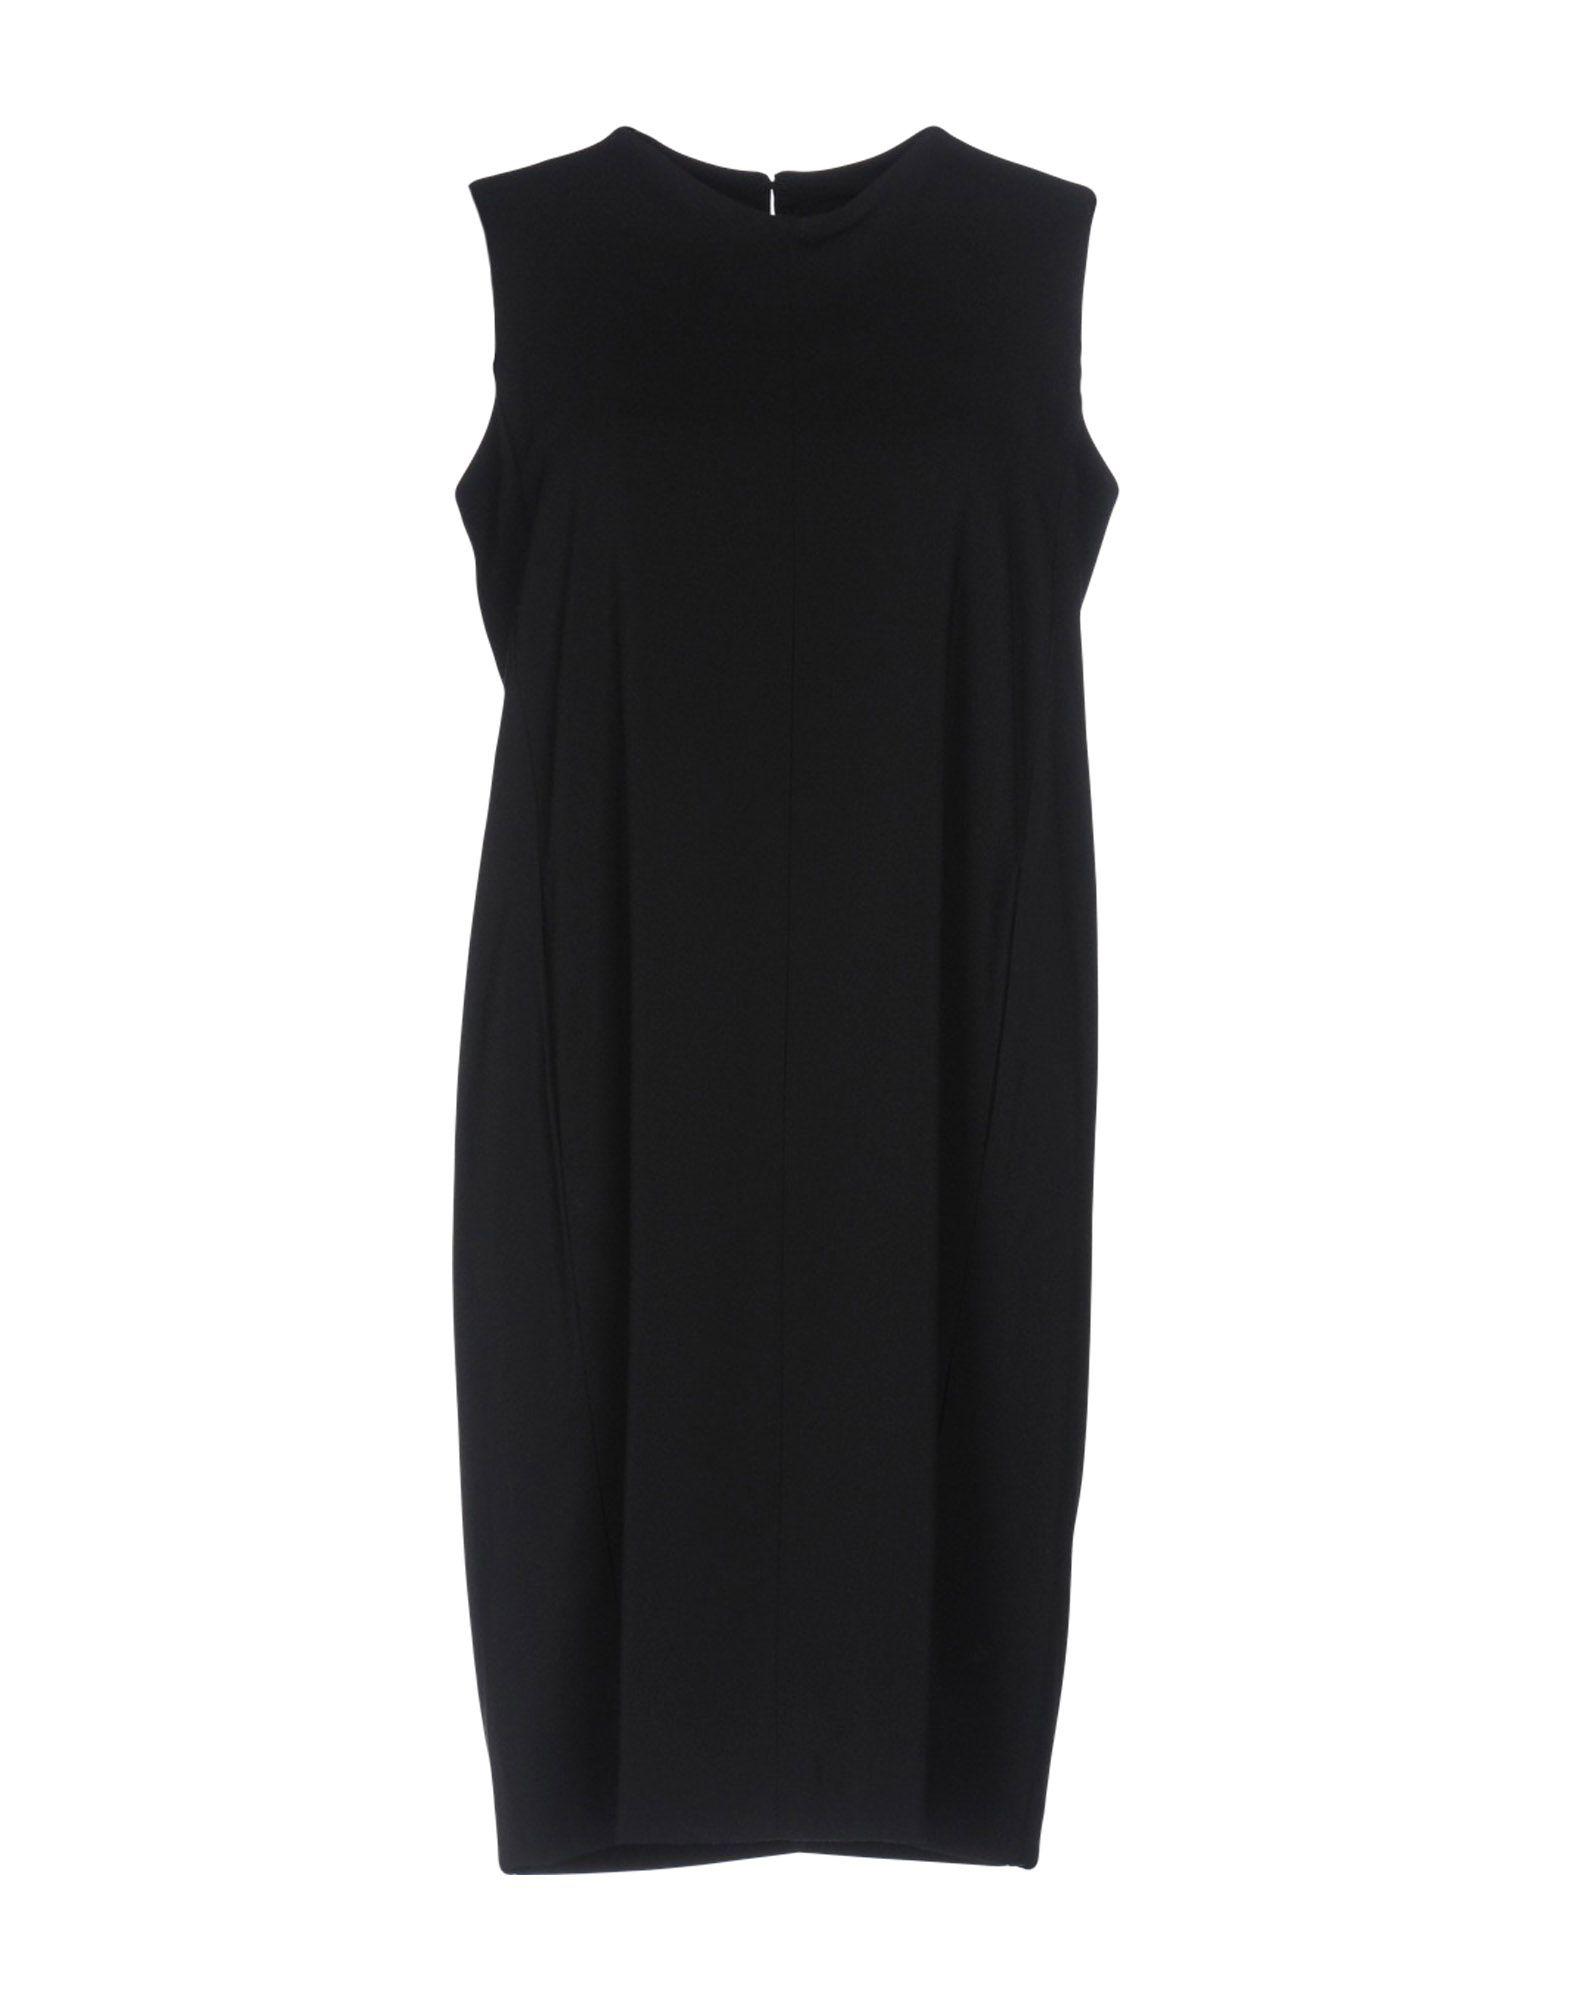 Brian Dales Synthetic Short Dress in Black - Lyst